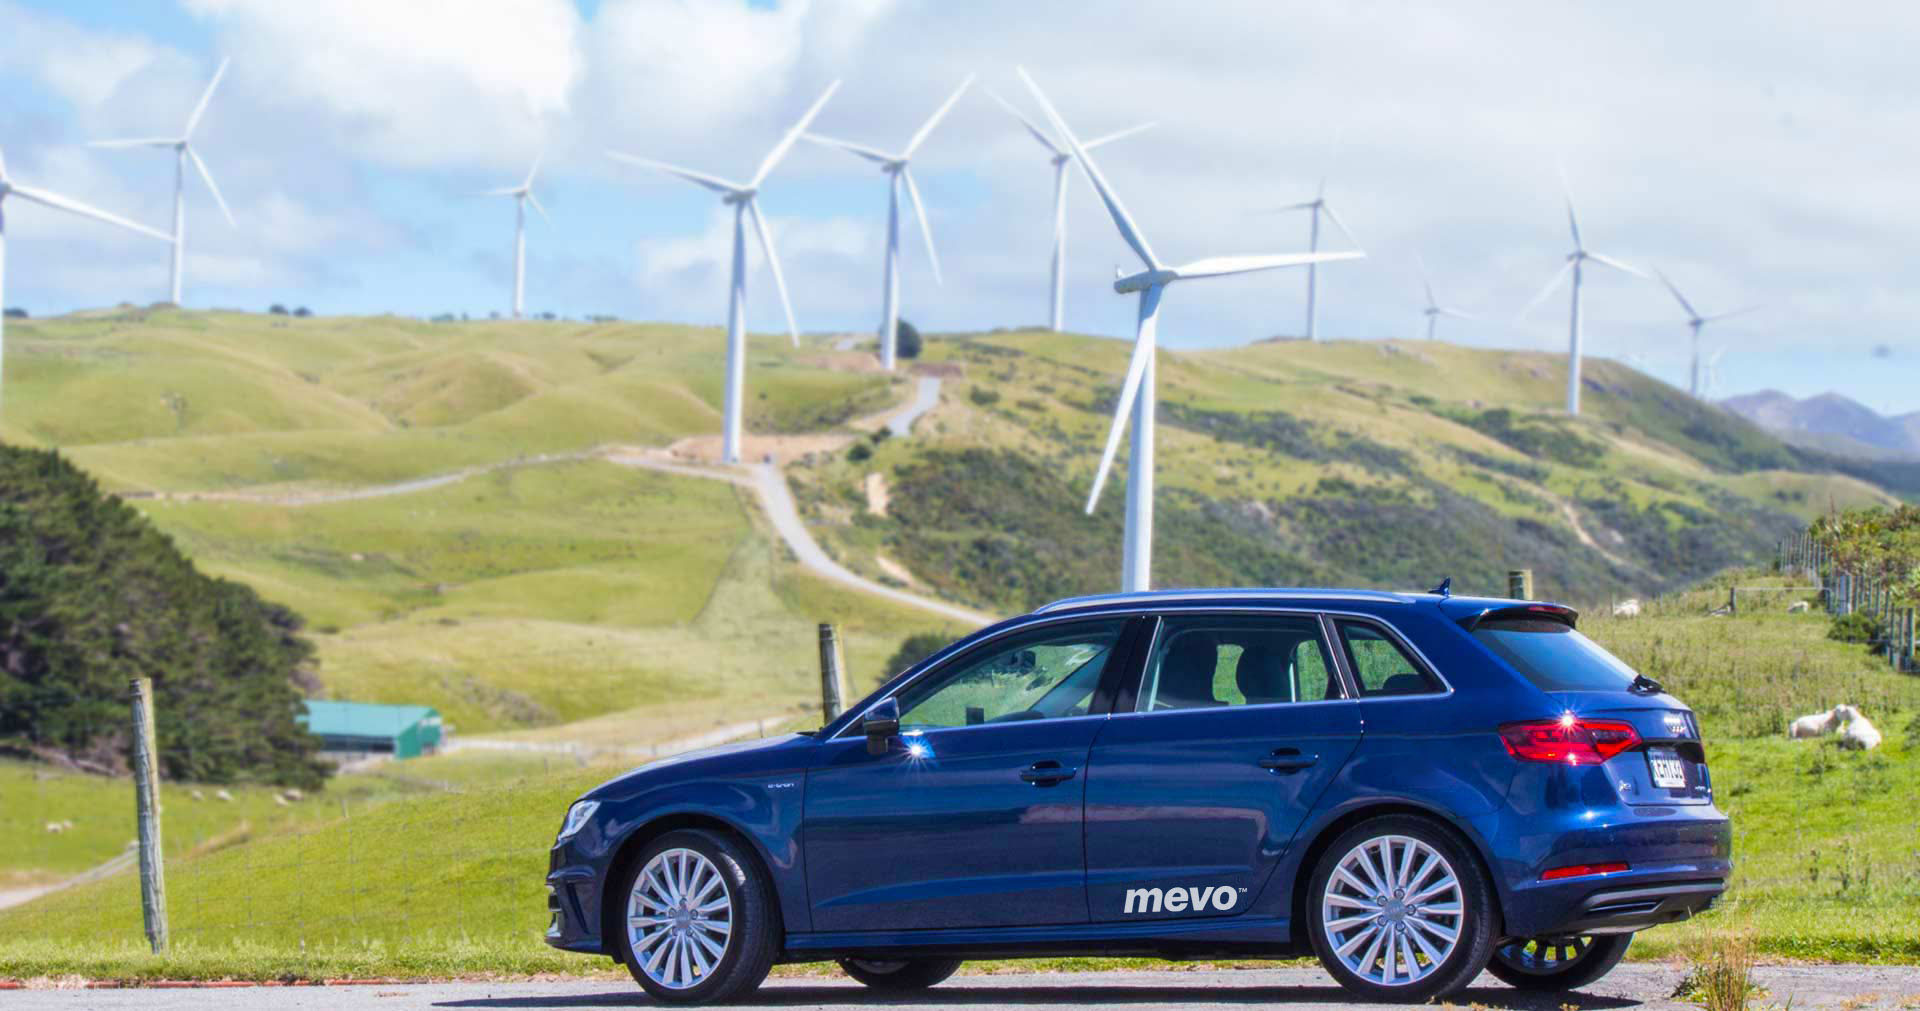 Audi A3 e-tron parked at Meridian Energy's West Wind farm